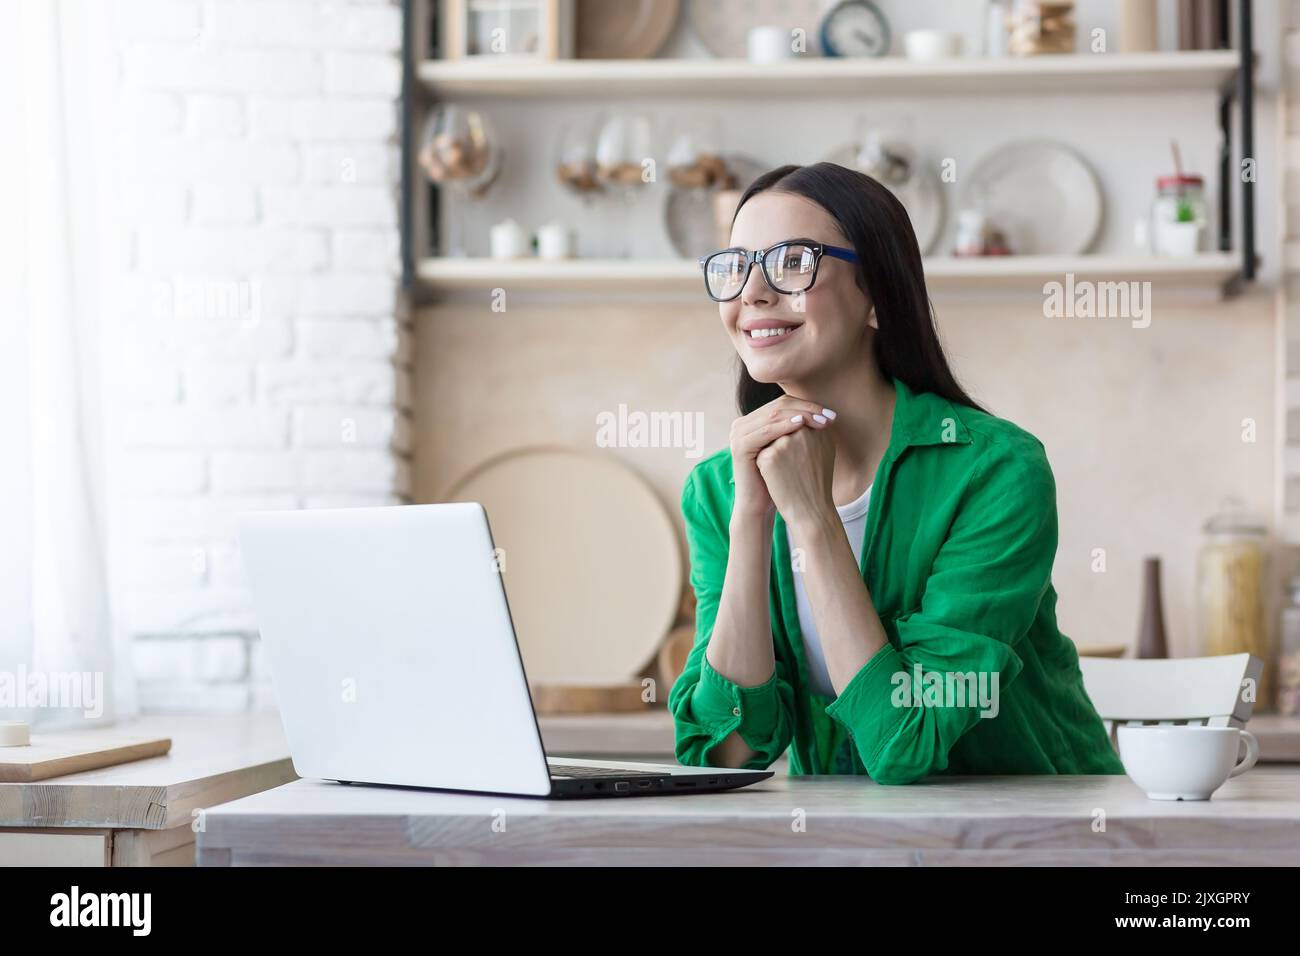 Blogging. Freelancer. A young woman in glasses sitting at home in the kitchen with a laptop, writing a post, working on social networks, chatting. She folded her hands under chin, thinking, smiling. Stock Photo